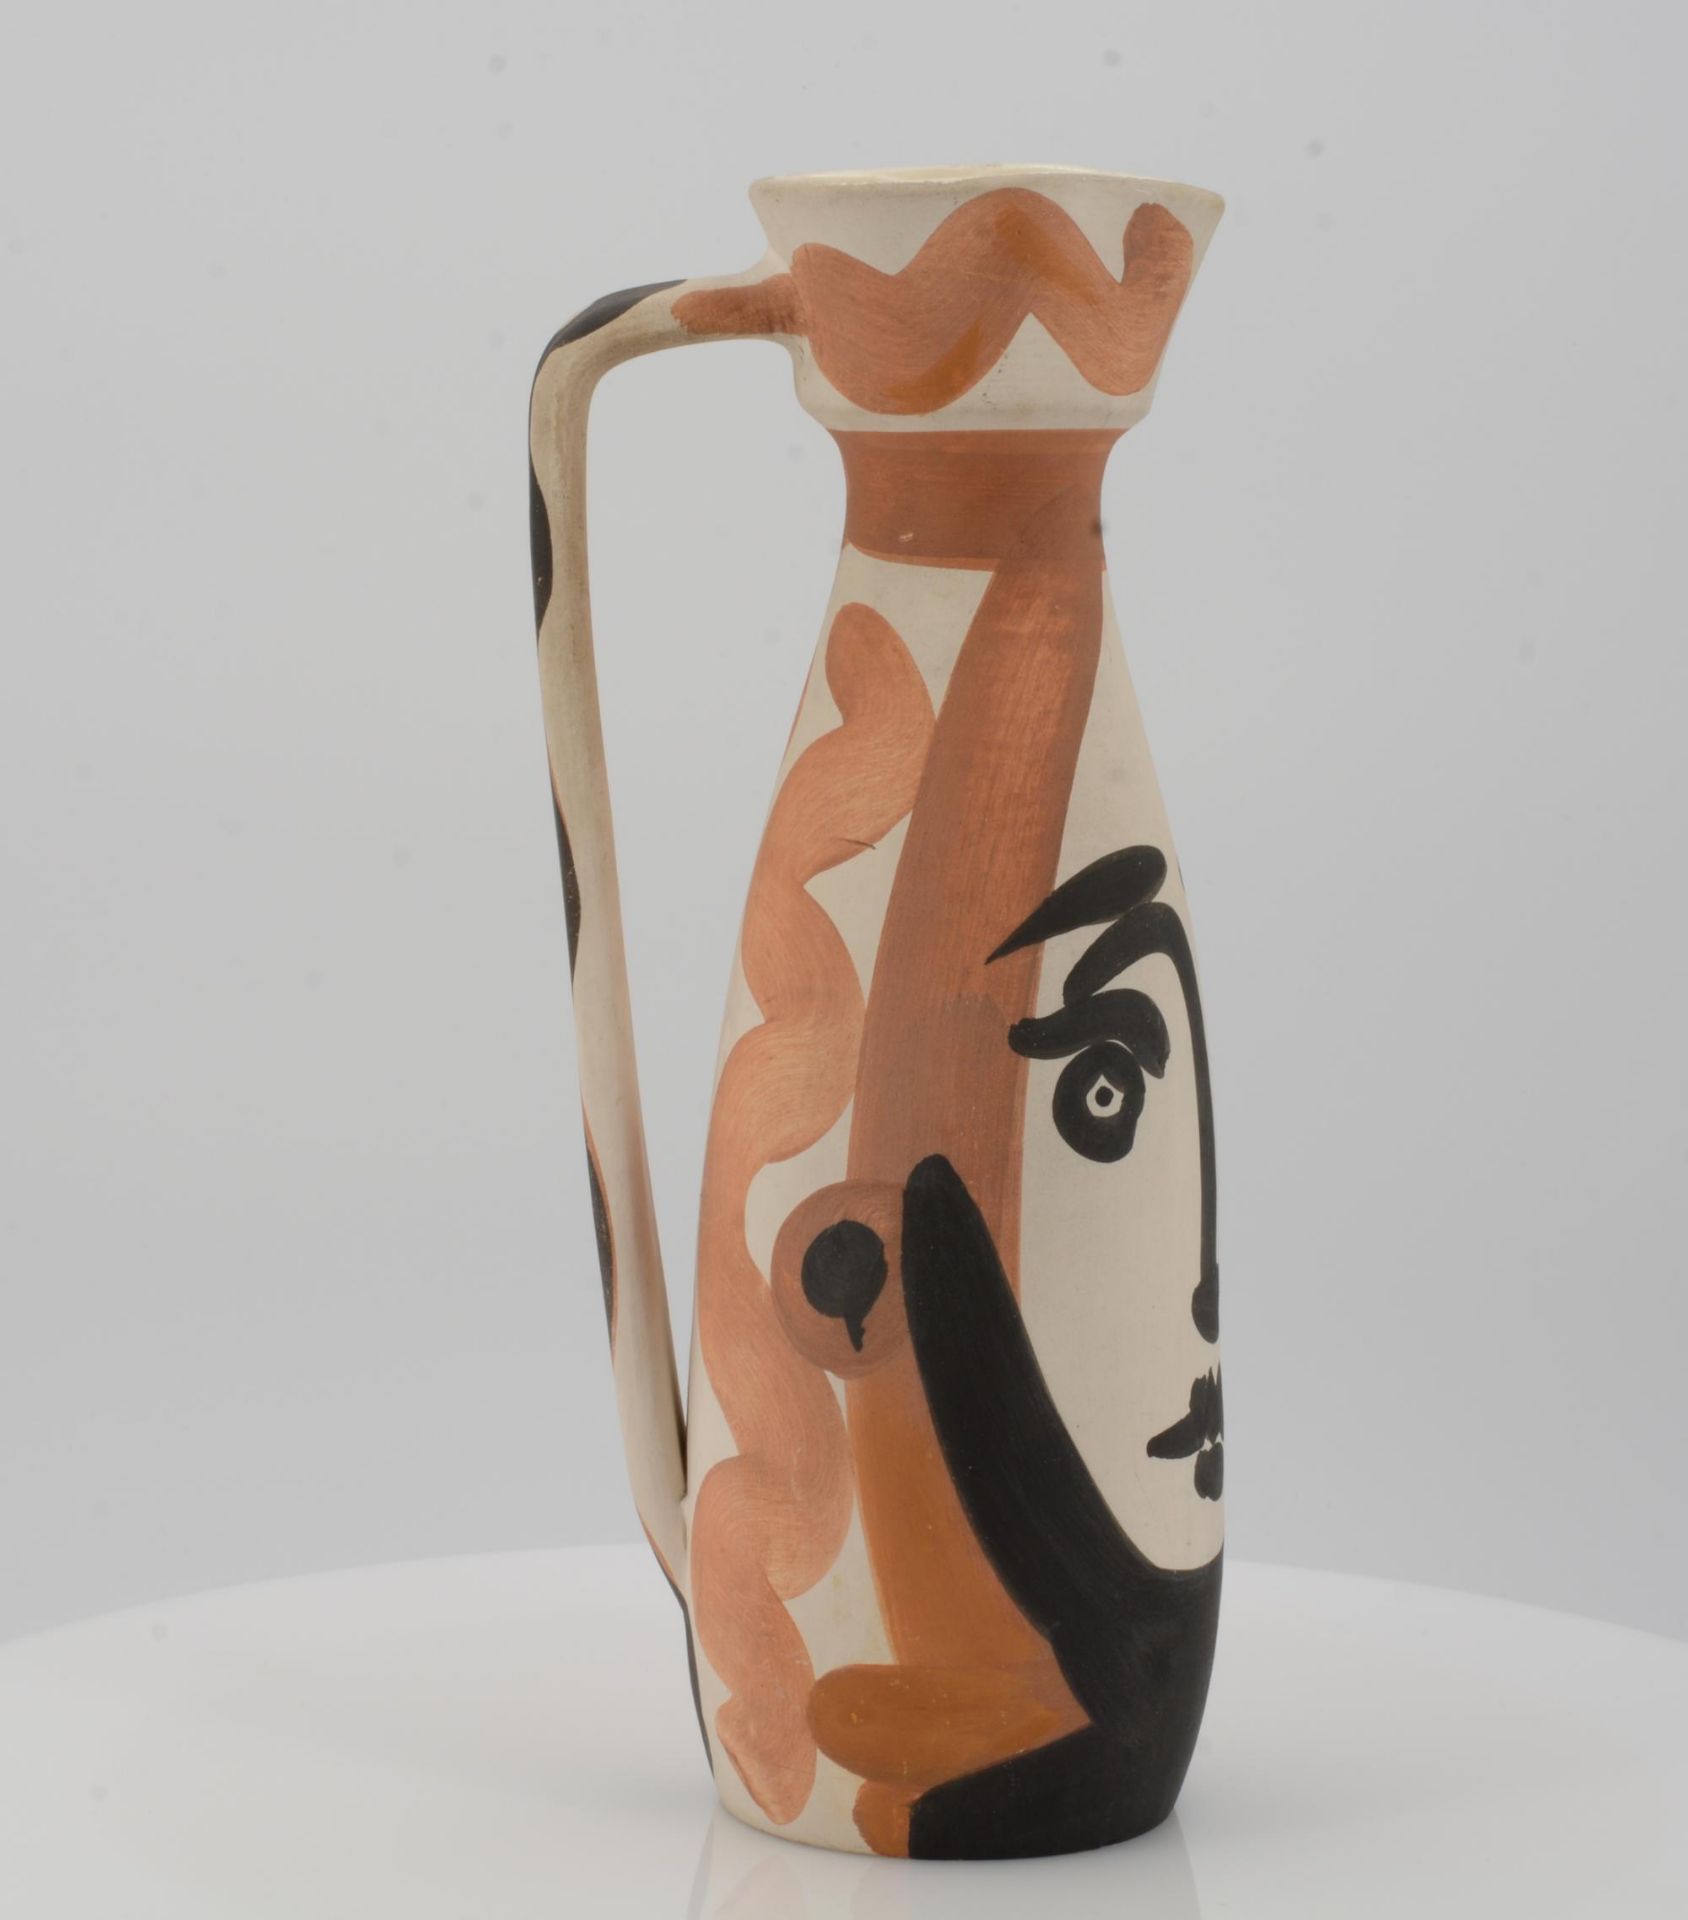 Picasso, Pablo1881 Malaga - 1973 MouginsFace. 1955. White earthenware clay, polychromed and glazed - Image 6 of 9